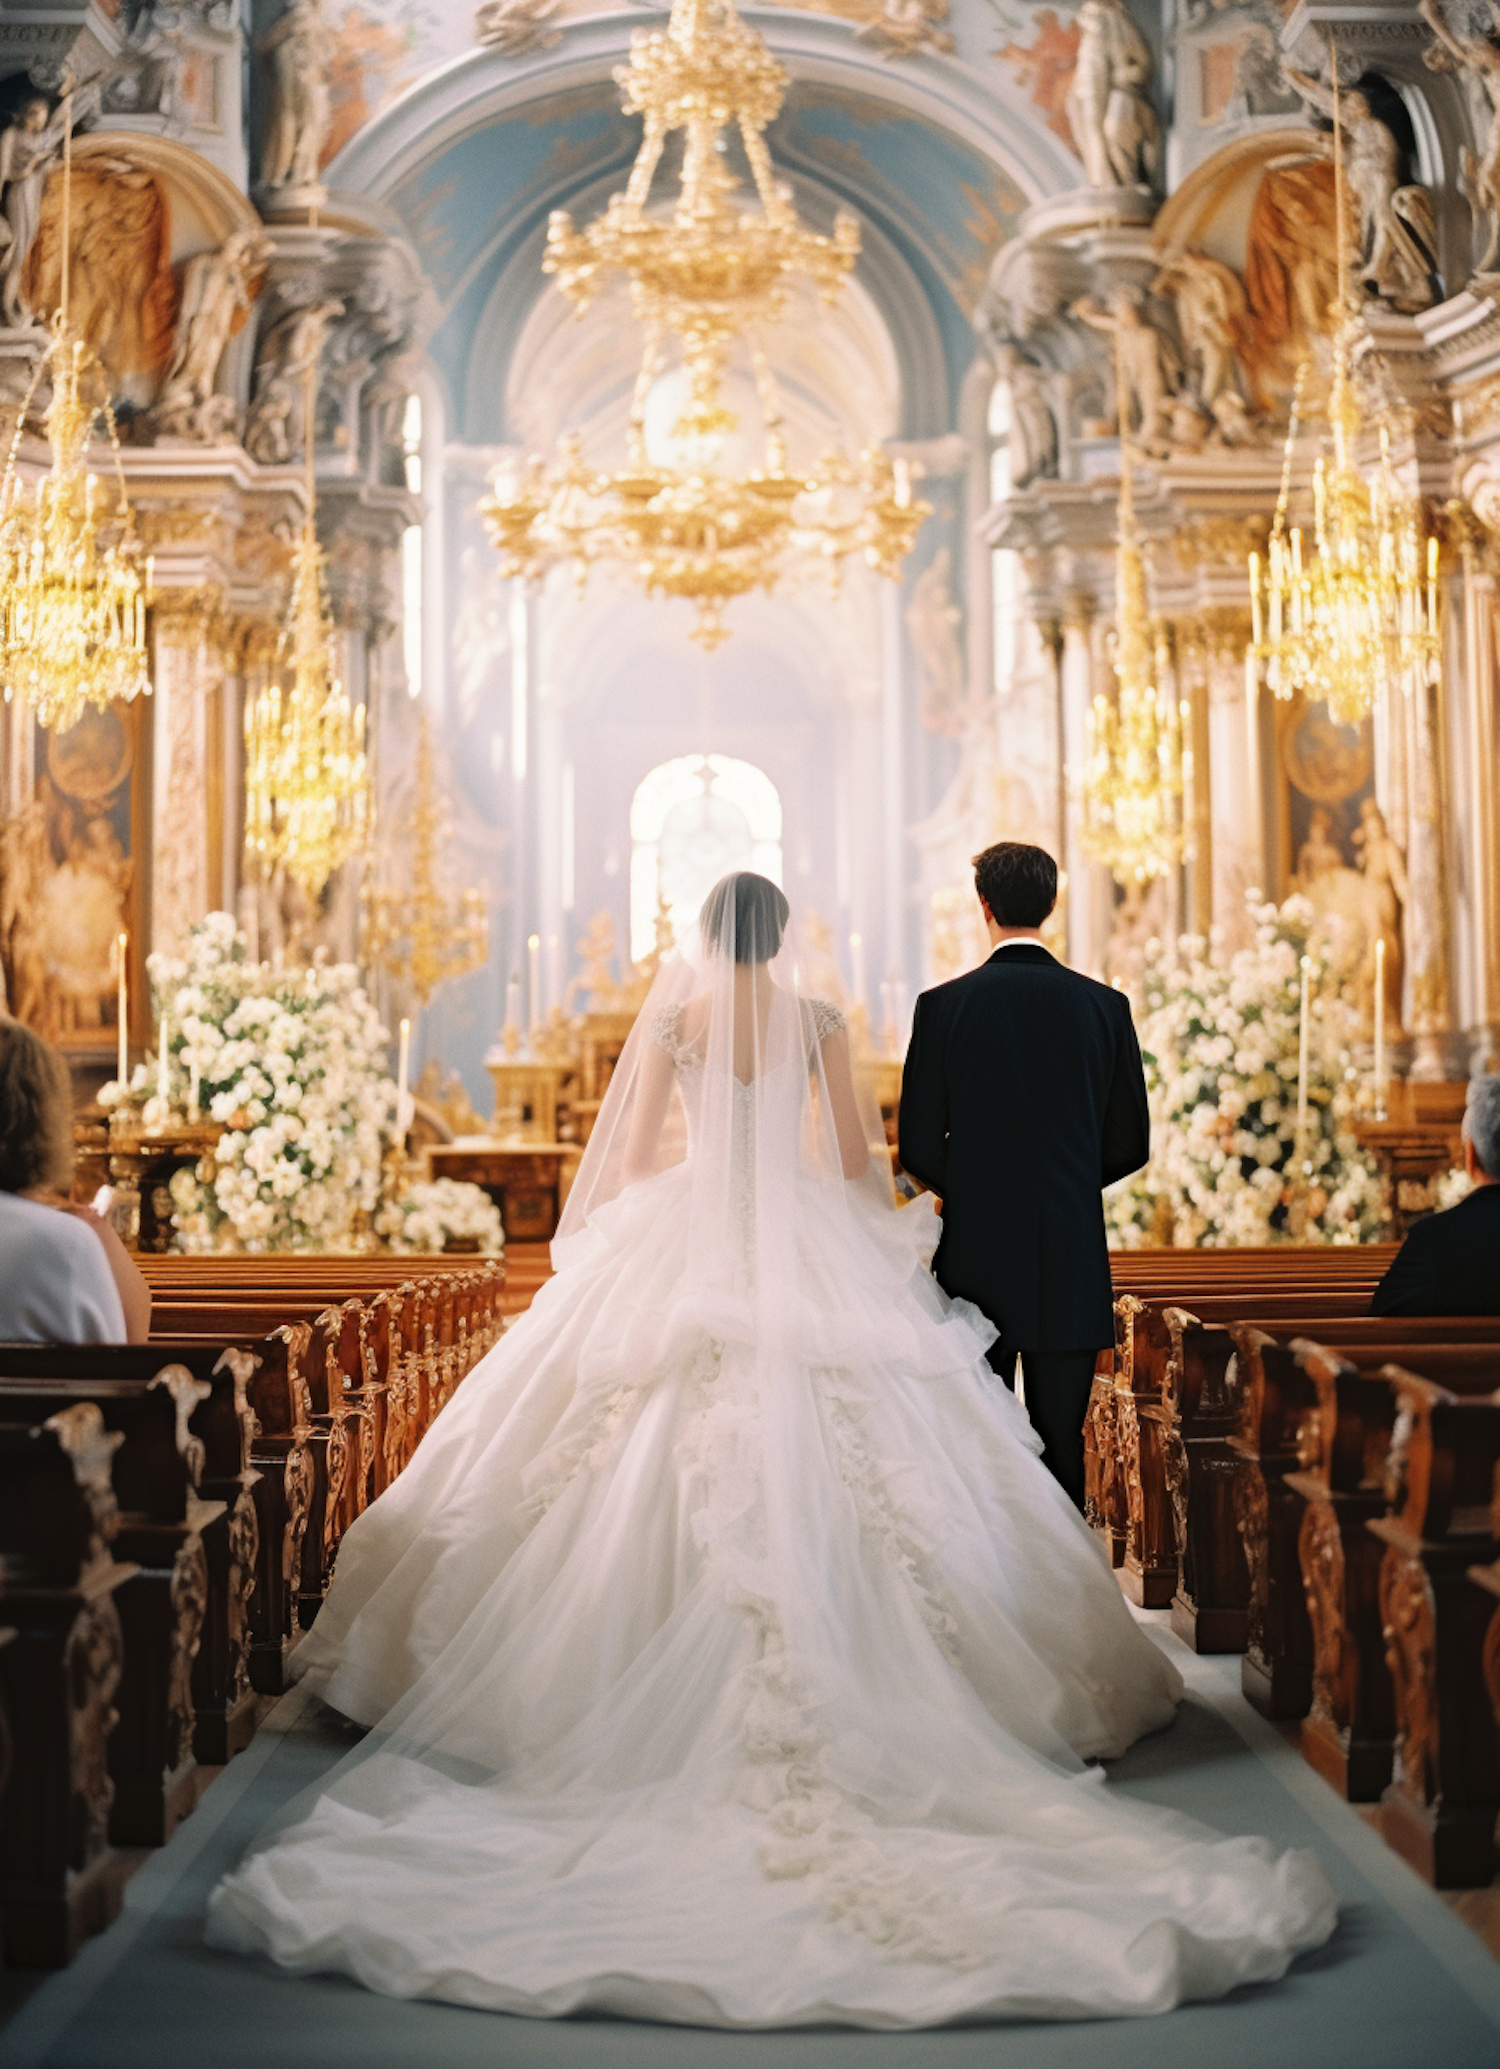 A Timeless Beginning: Bride and Groom in Grand Church Aisle